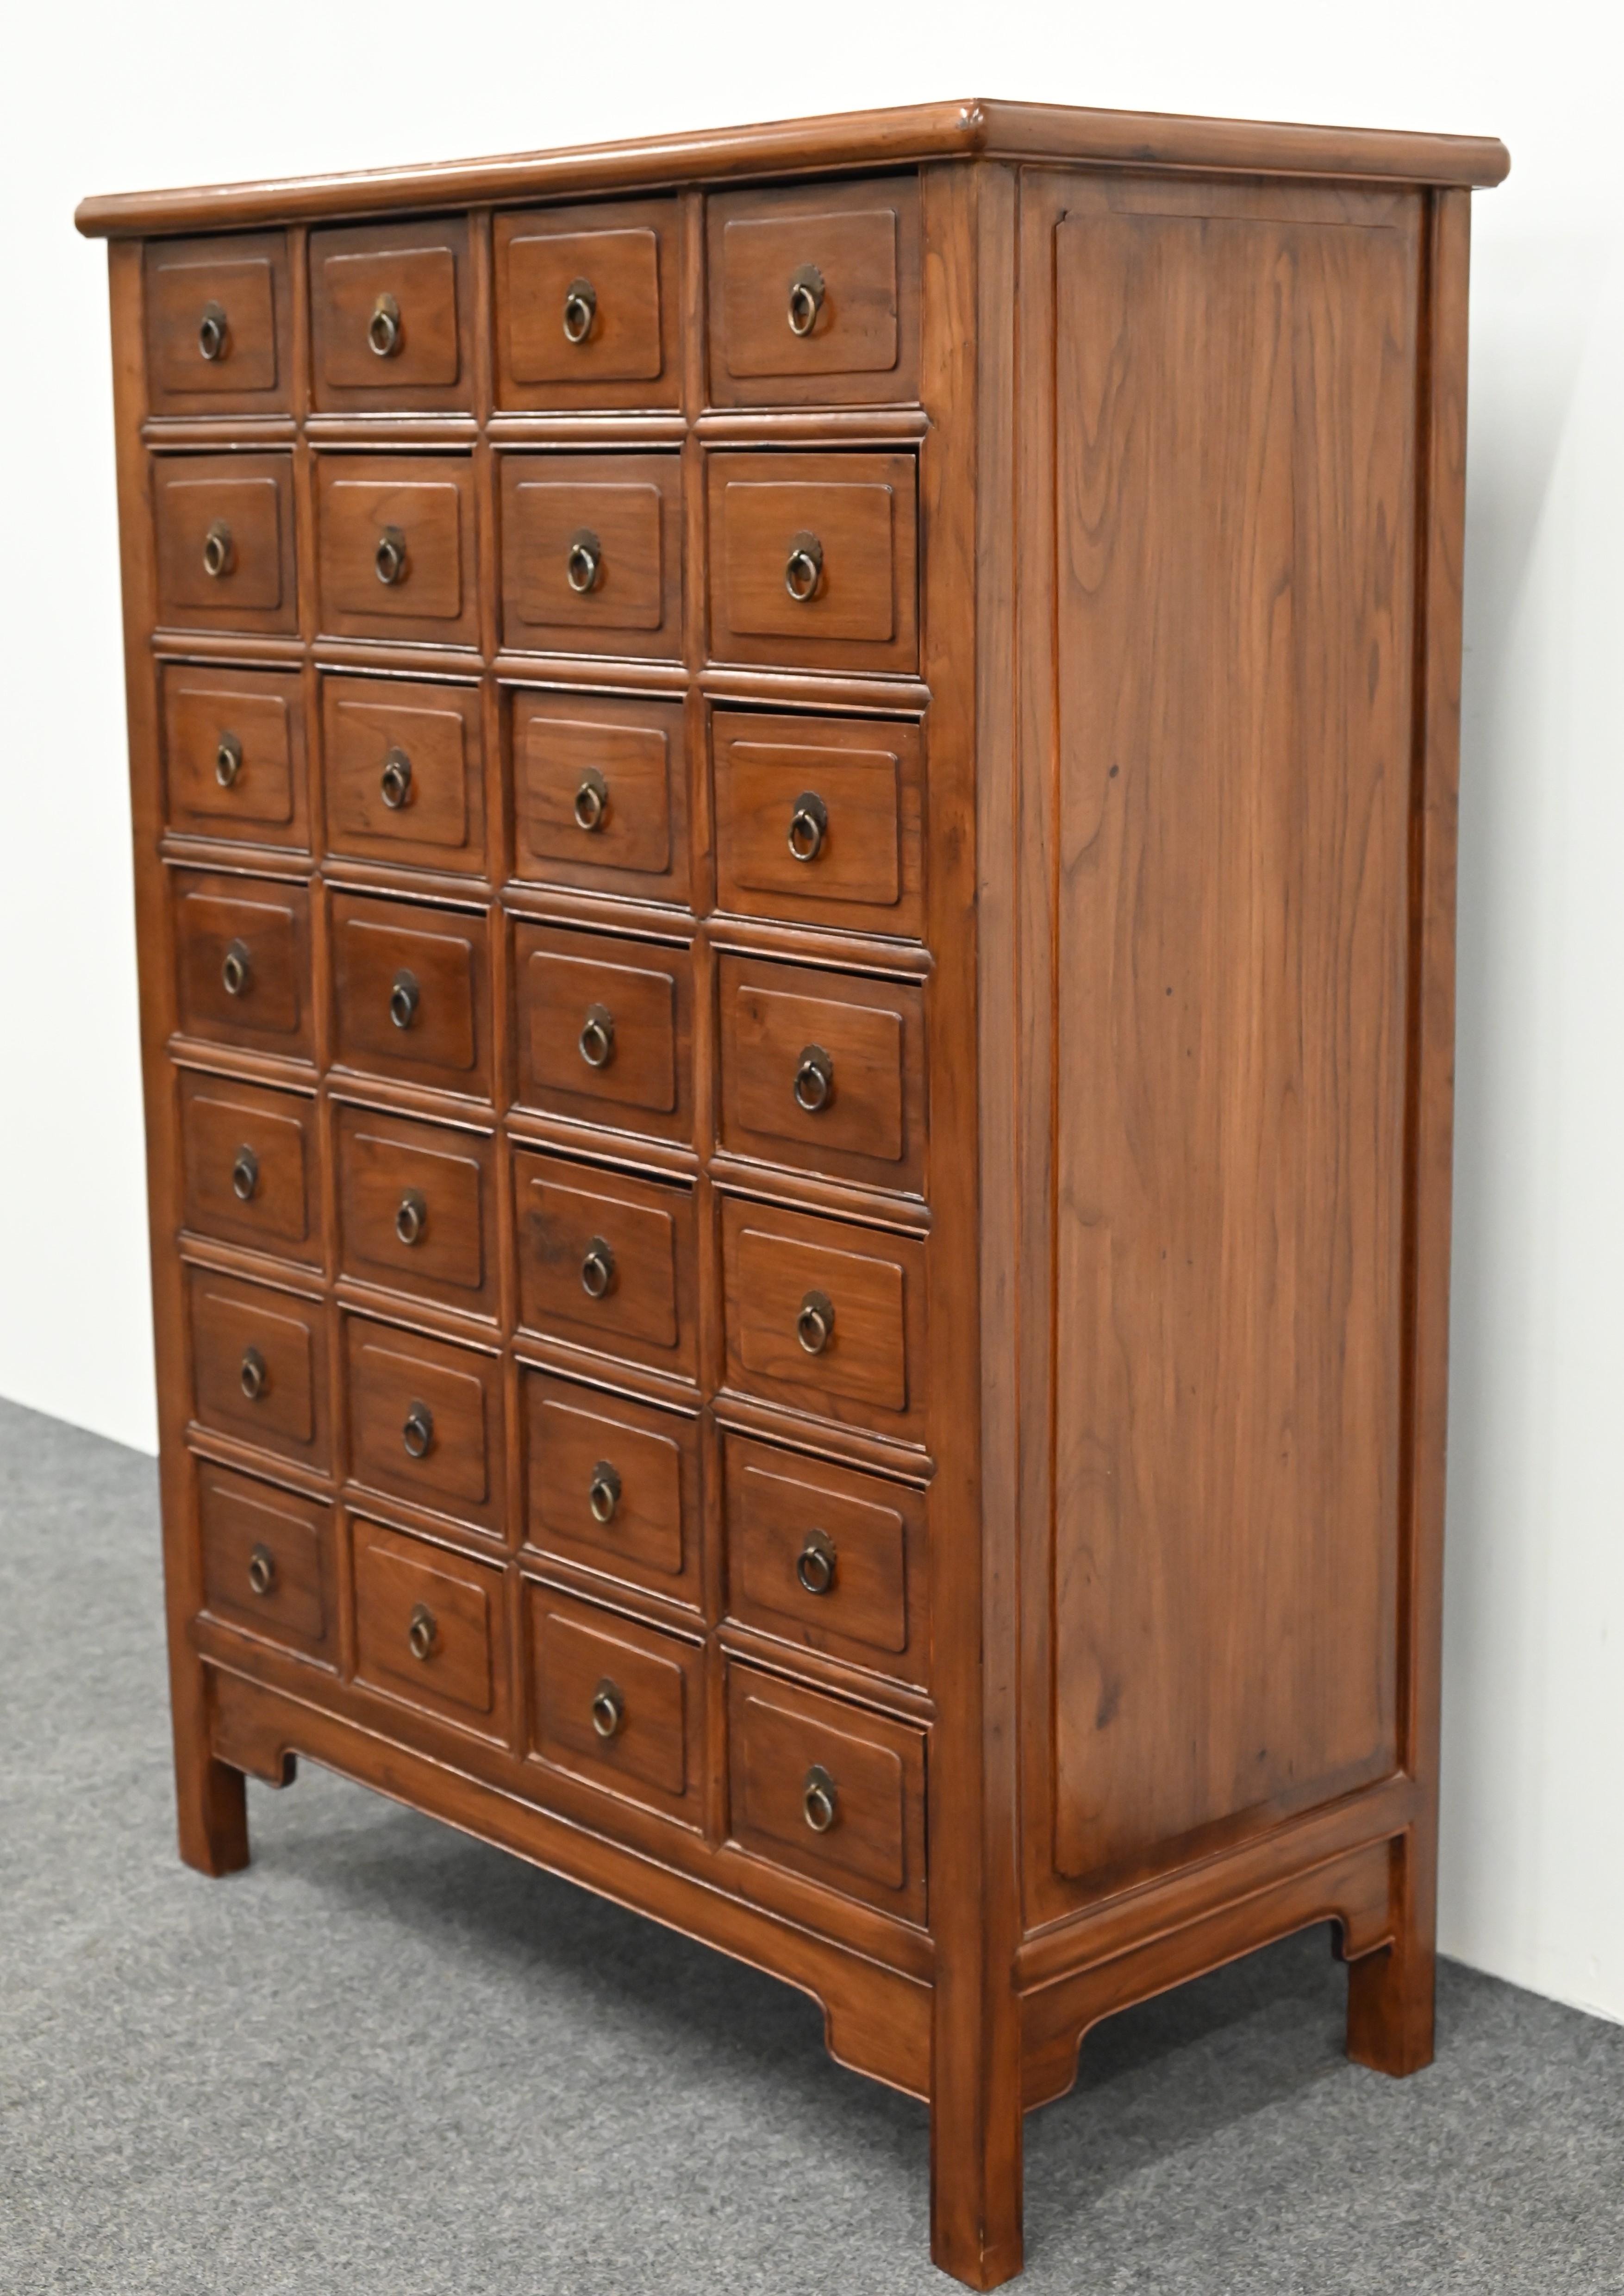 This unique 28-drawer Chinese Apothecary Cabinet has many functional attributes to this handsome piece. This Asian cabinet is designed in the Qing style was most likely made in the late 20th Century. Still has some age and a wonderful color and